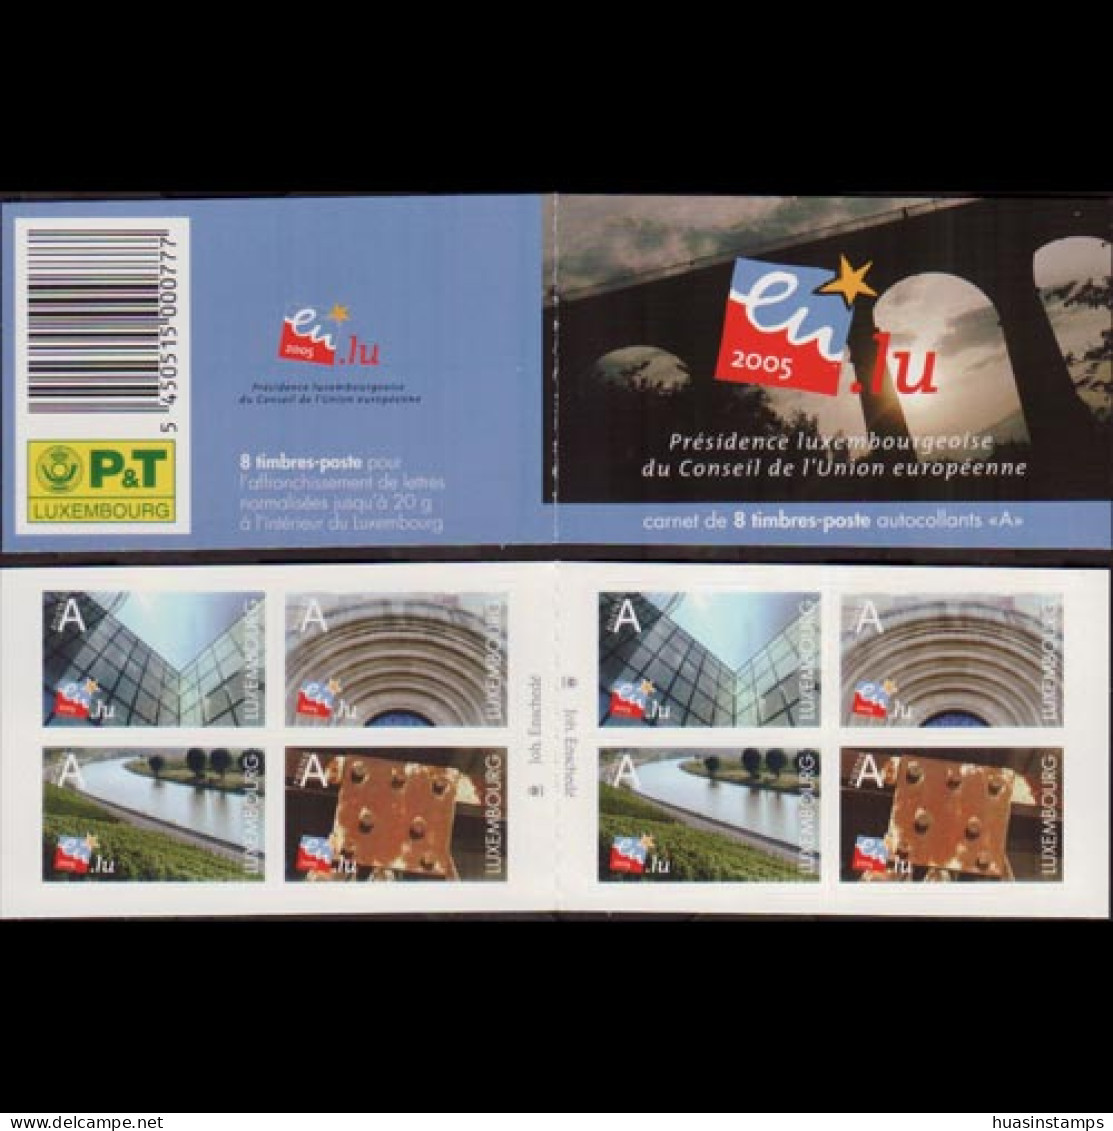 LUXEMBOURG 2005 - Scott# 1153 Booklet-Eurpean Council MNH - Nuevos